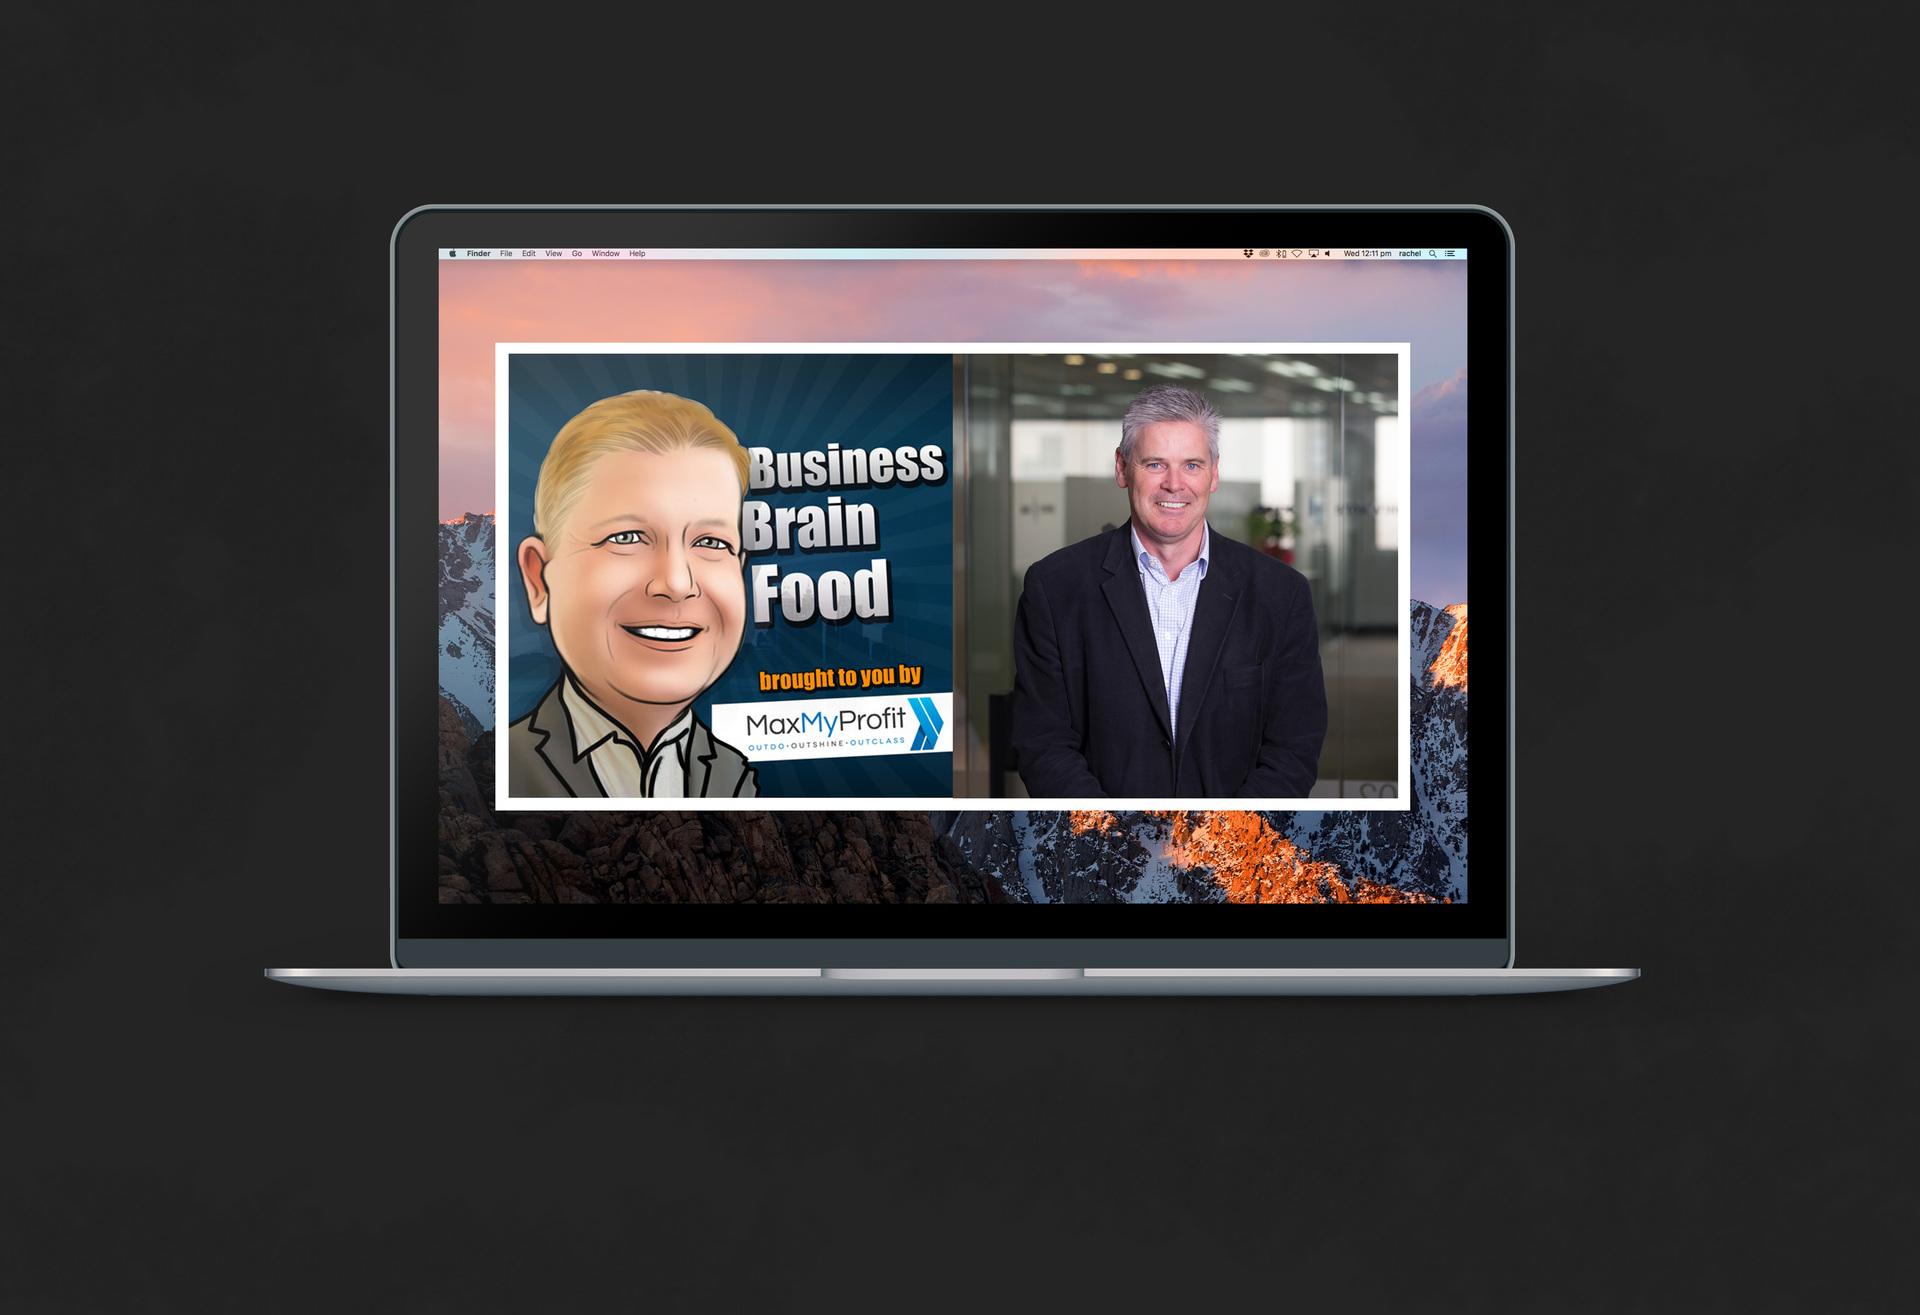 Business Brain Food's logo and Damian Kernahan's image side-by-side on a laptop screen, showing them together on Ben Fewtrell's Brainfood Podcast